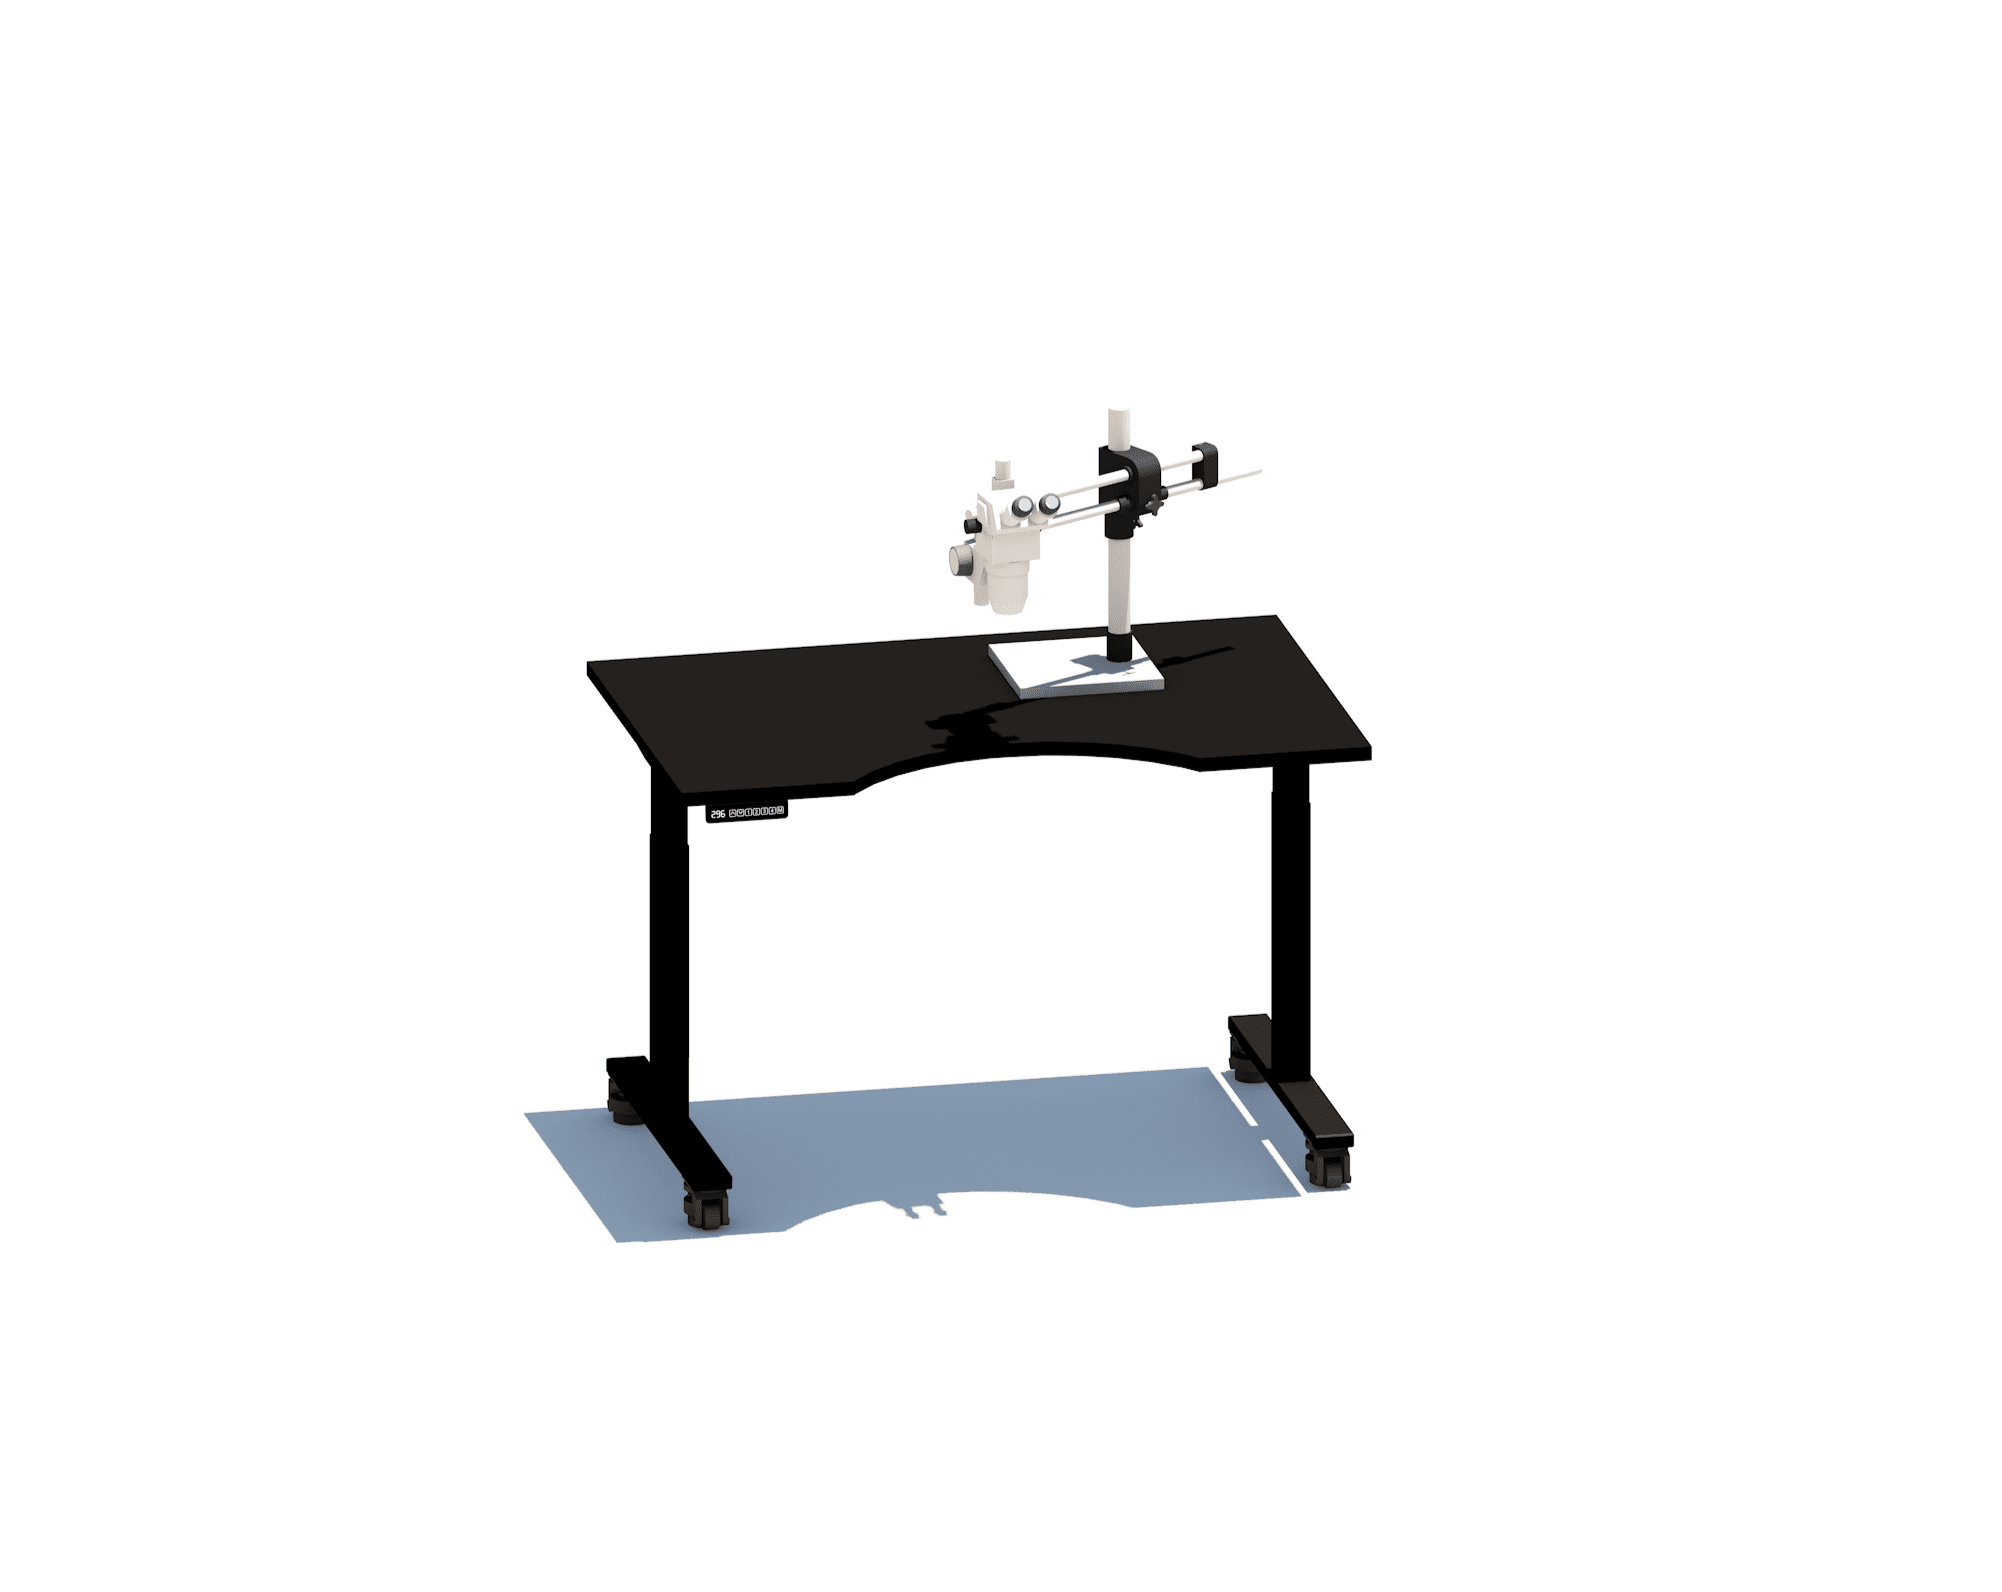 Microscope Station - series two Microscope Stations OMNI Lab Solutions 48" wide Mobile 